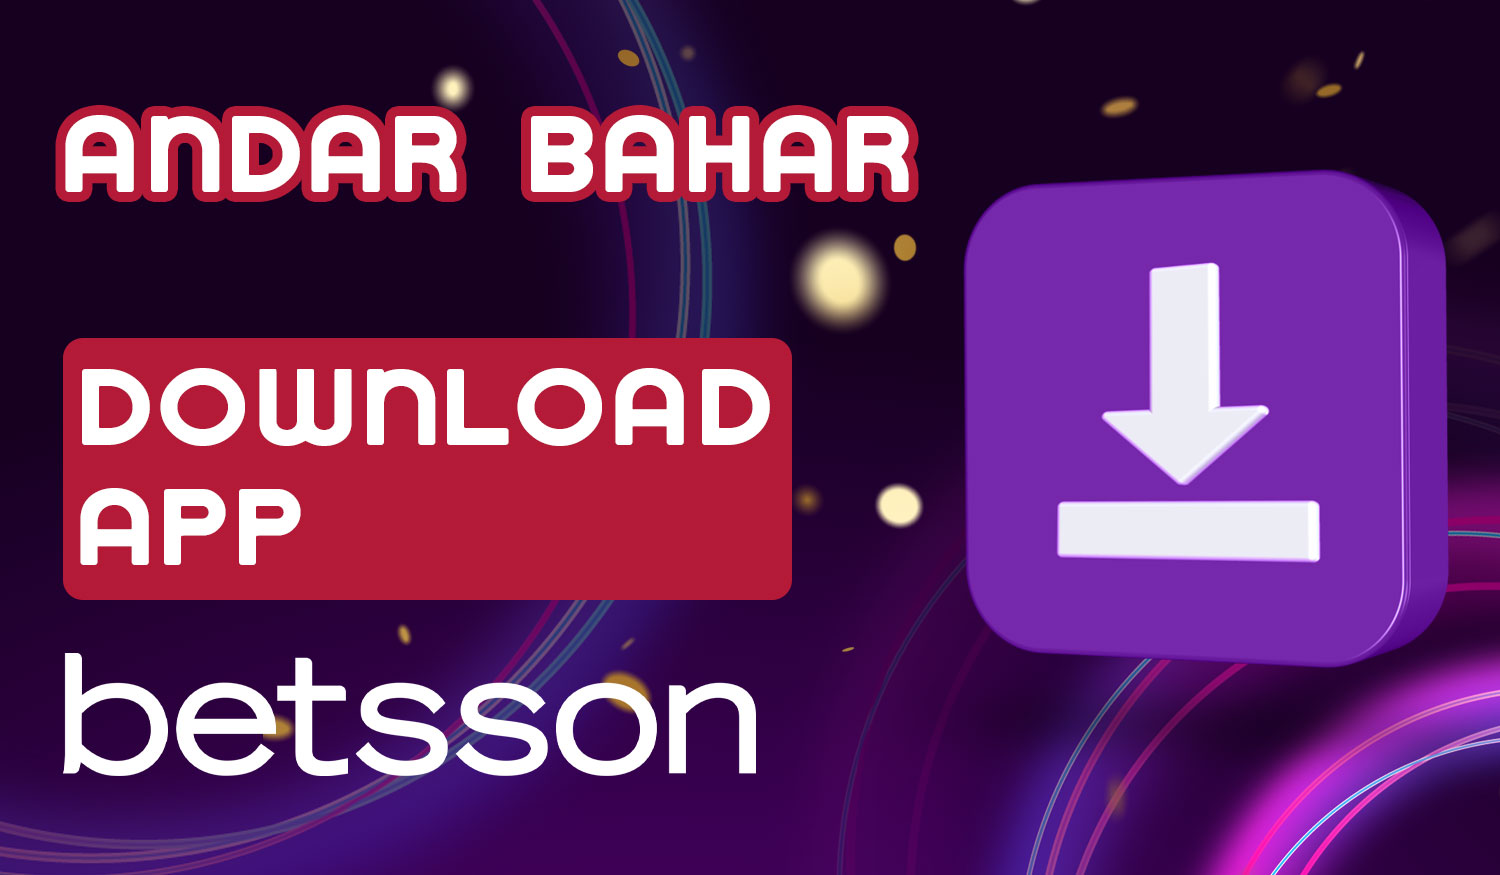 Detailed guide on how to download the Betsson online casino application for playing Andar Bahars